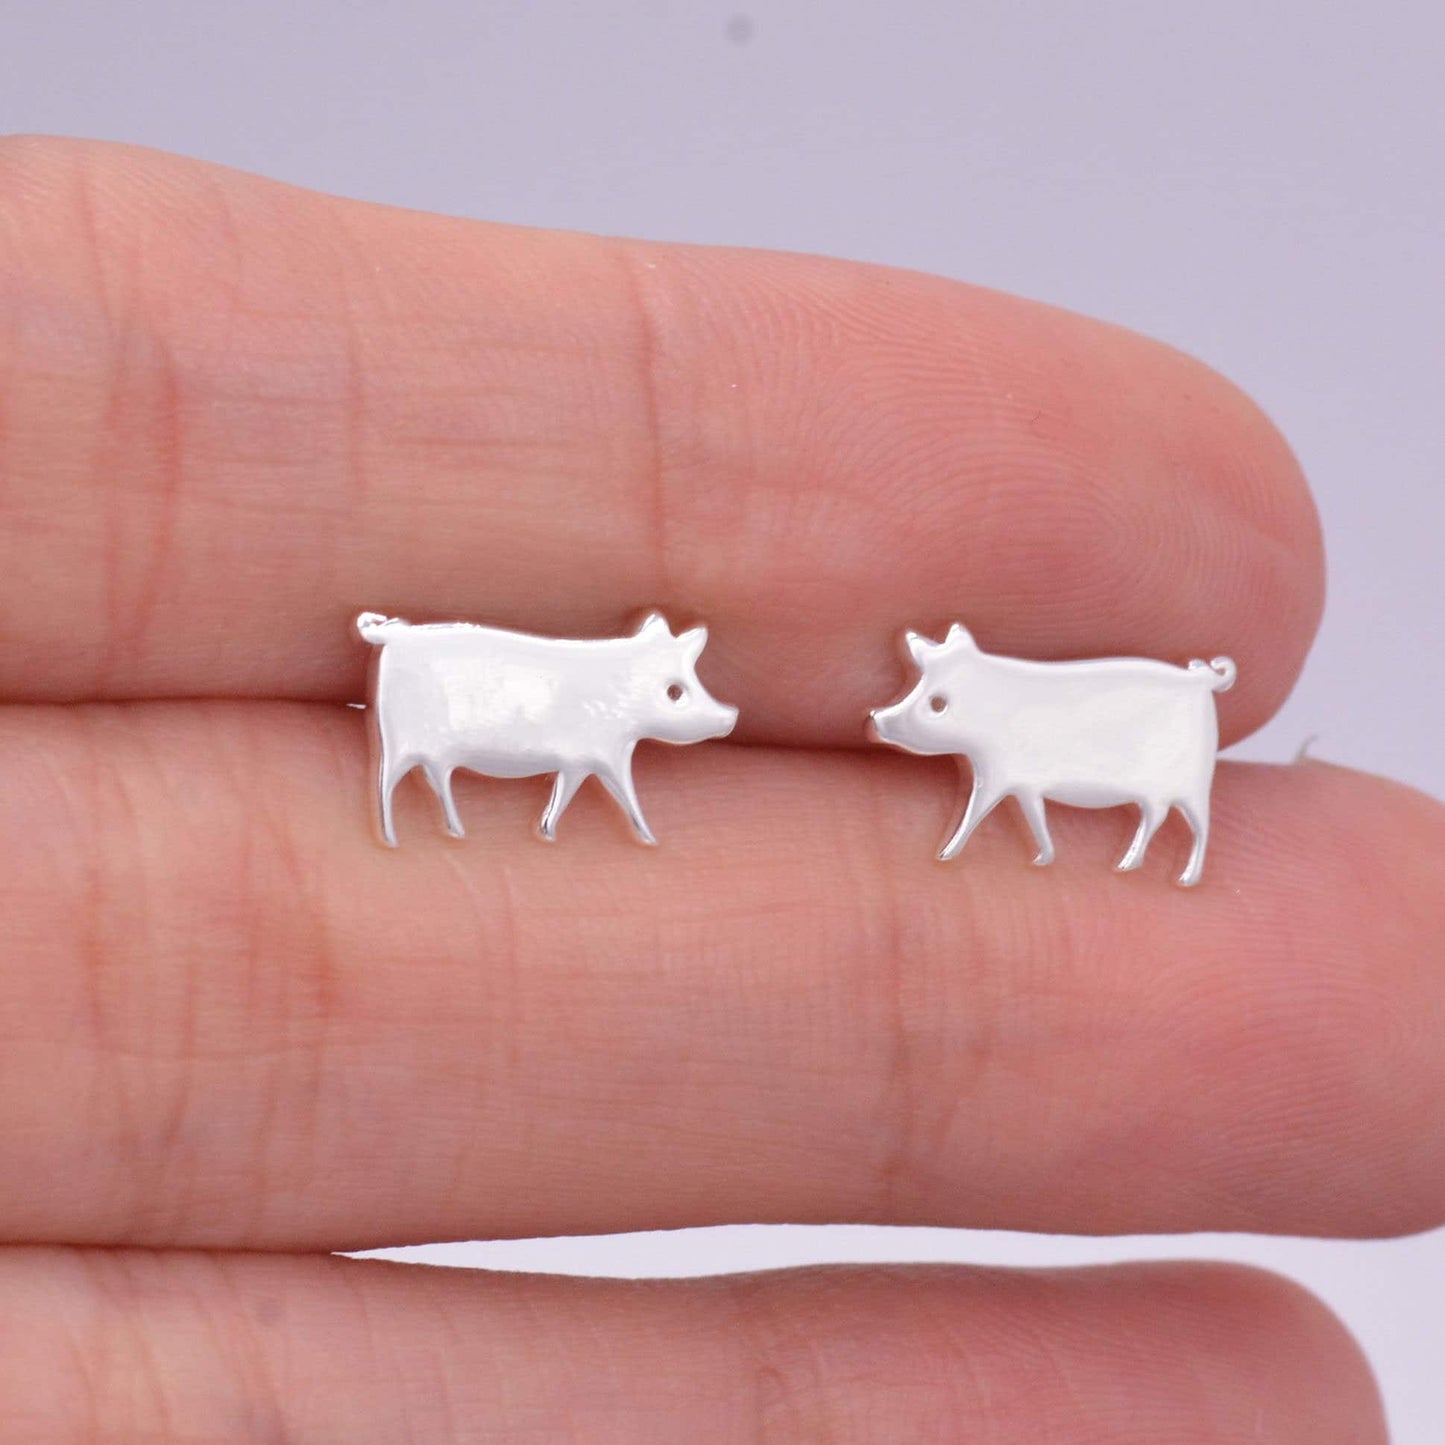 Pig Stud Earrings in Sterling Silver, Cute Fun Quirky, Jewellery Gift for Her, Animal Lover, Nature Inspired, Pigs Can Fly Stud